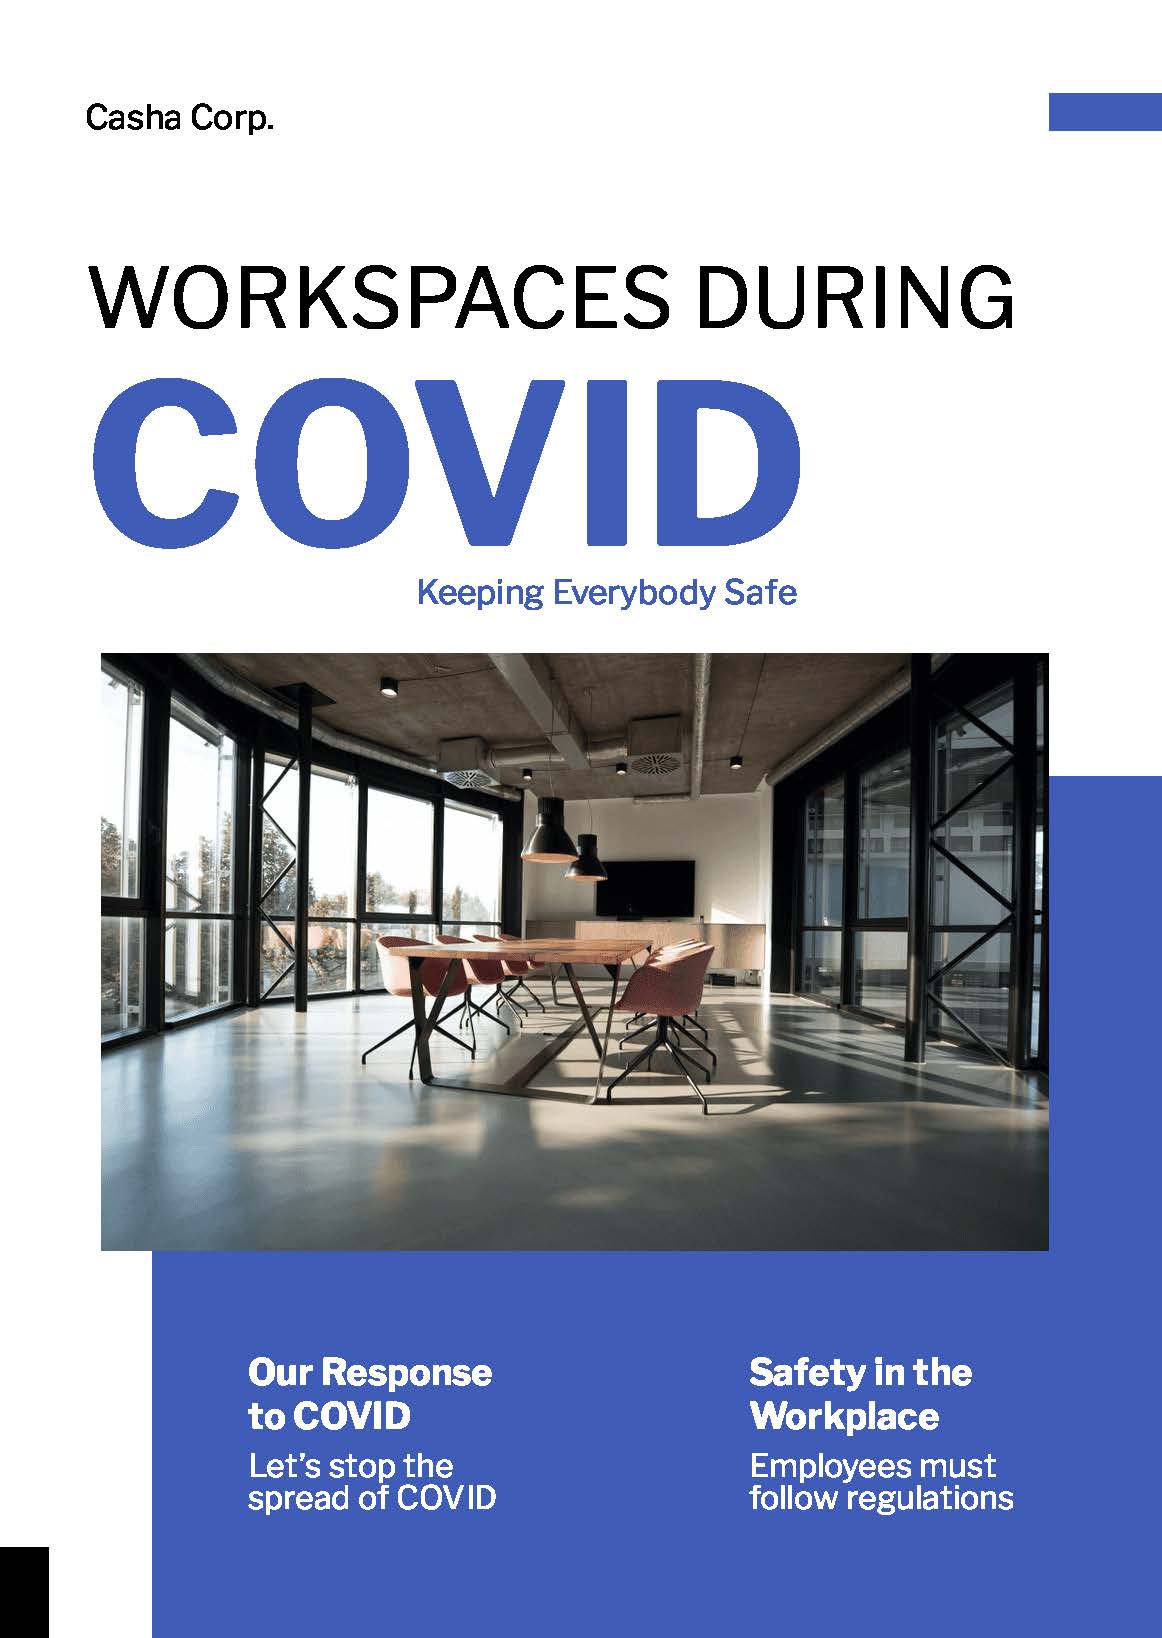 Workspaces During COVID Booklet Template in Word, Google Docs, Illustrator, PSD, Publisher